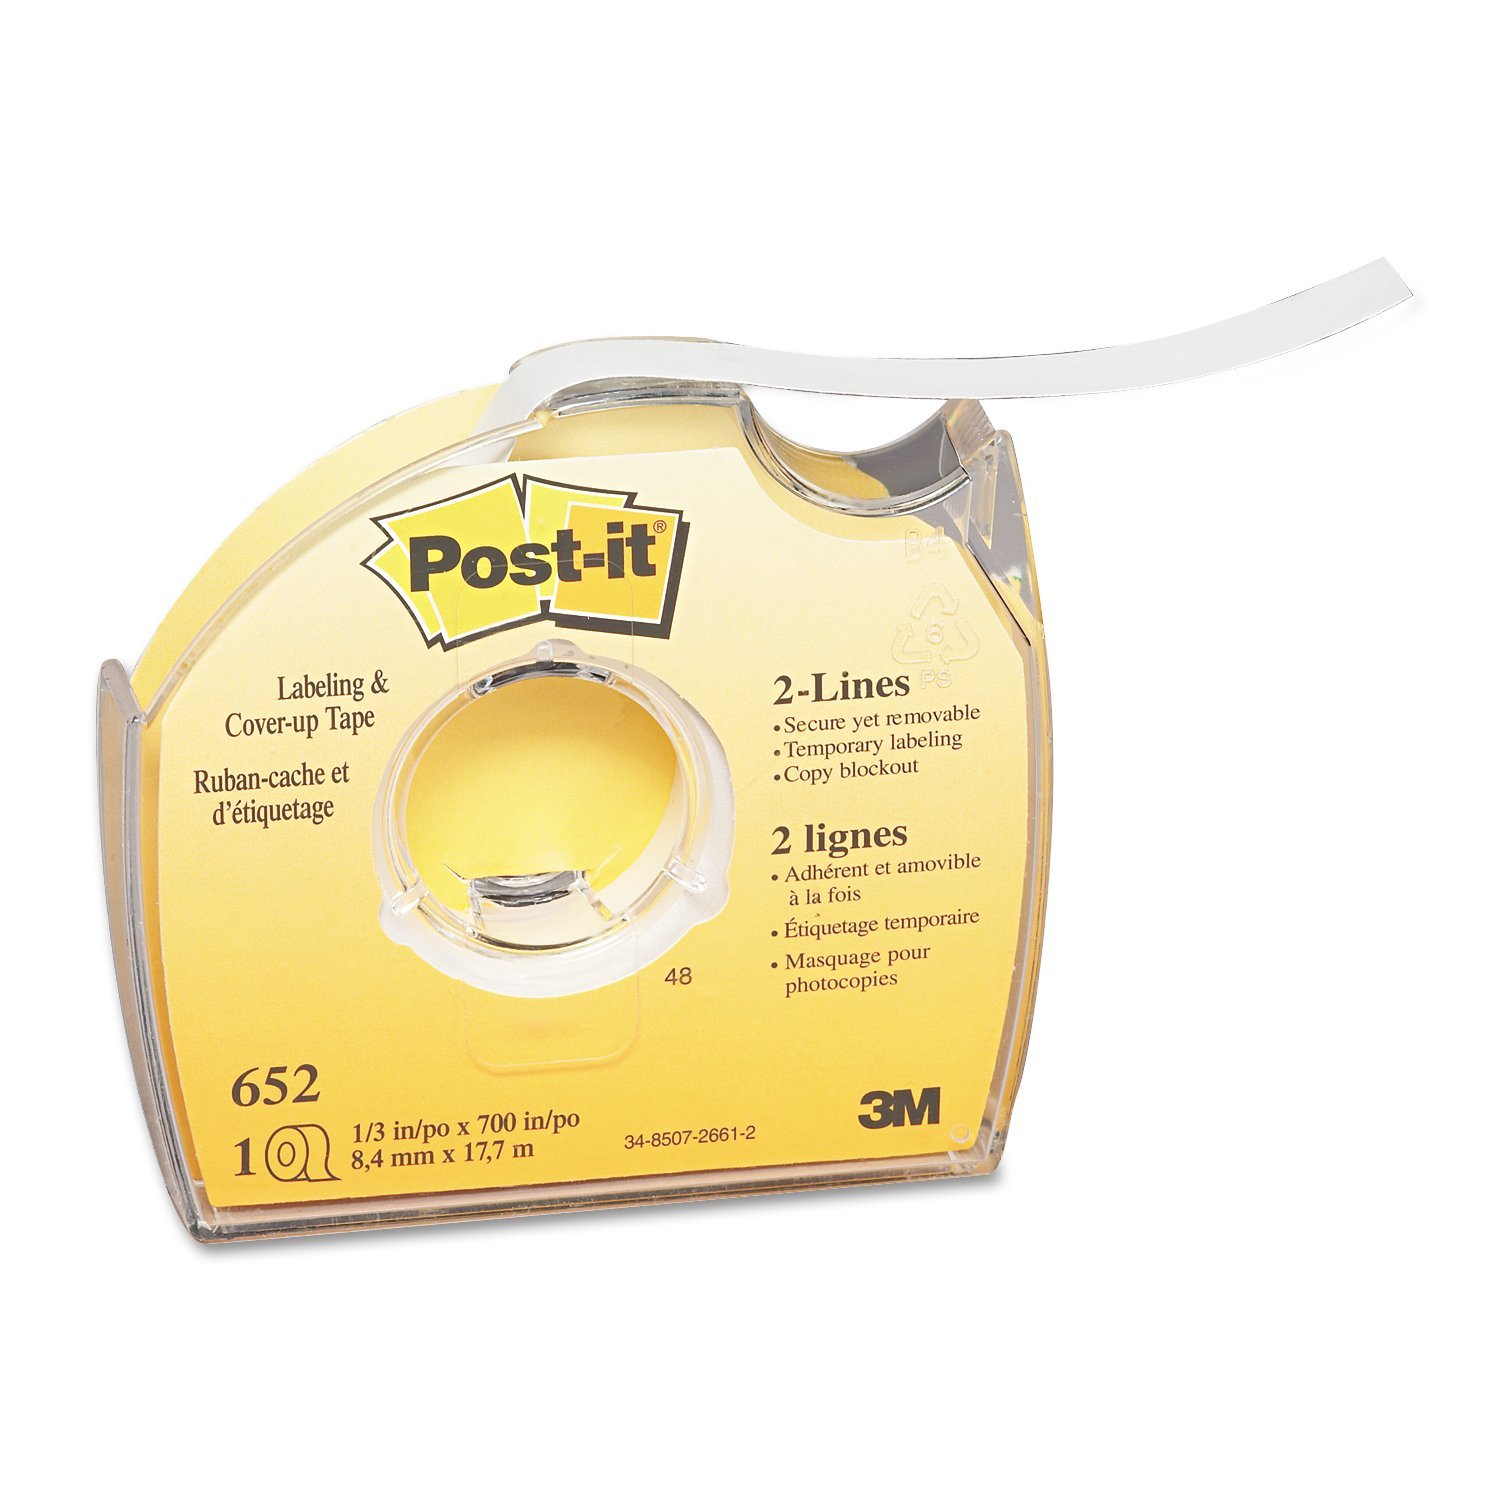 3M Post-it Labeling and Cover-Up Tape 652, 1/3-inch x 700 Inches